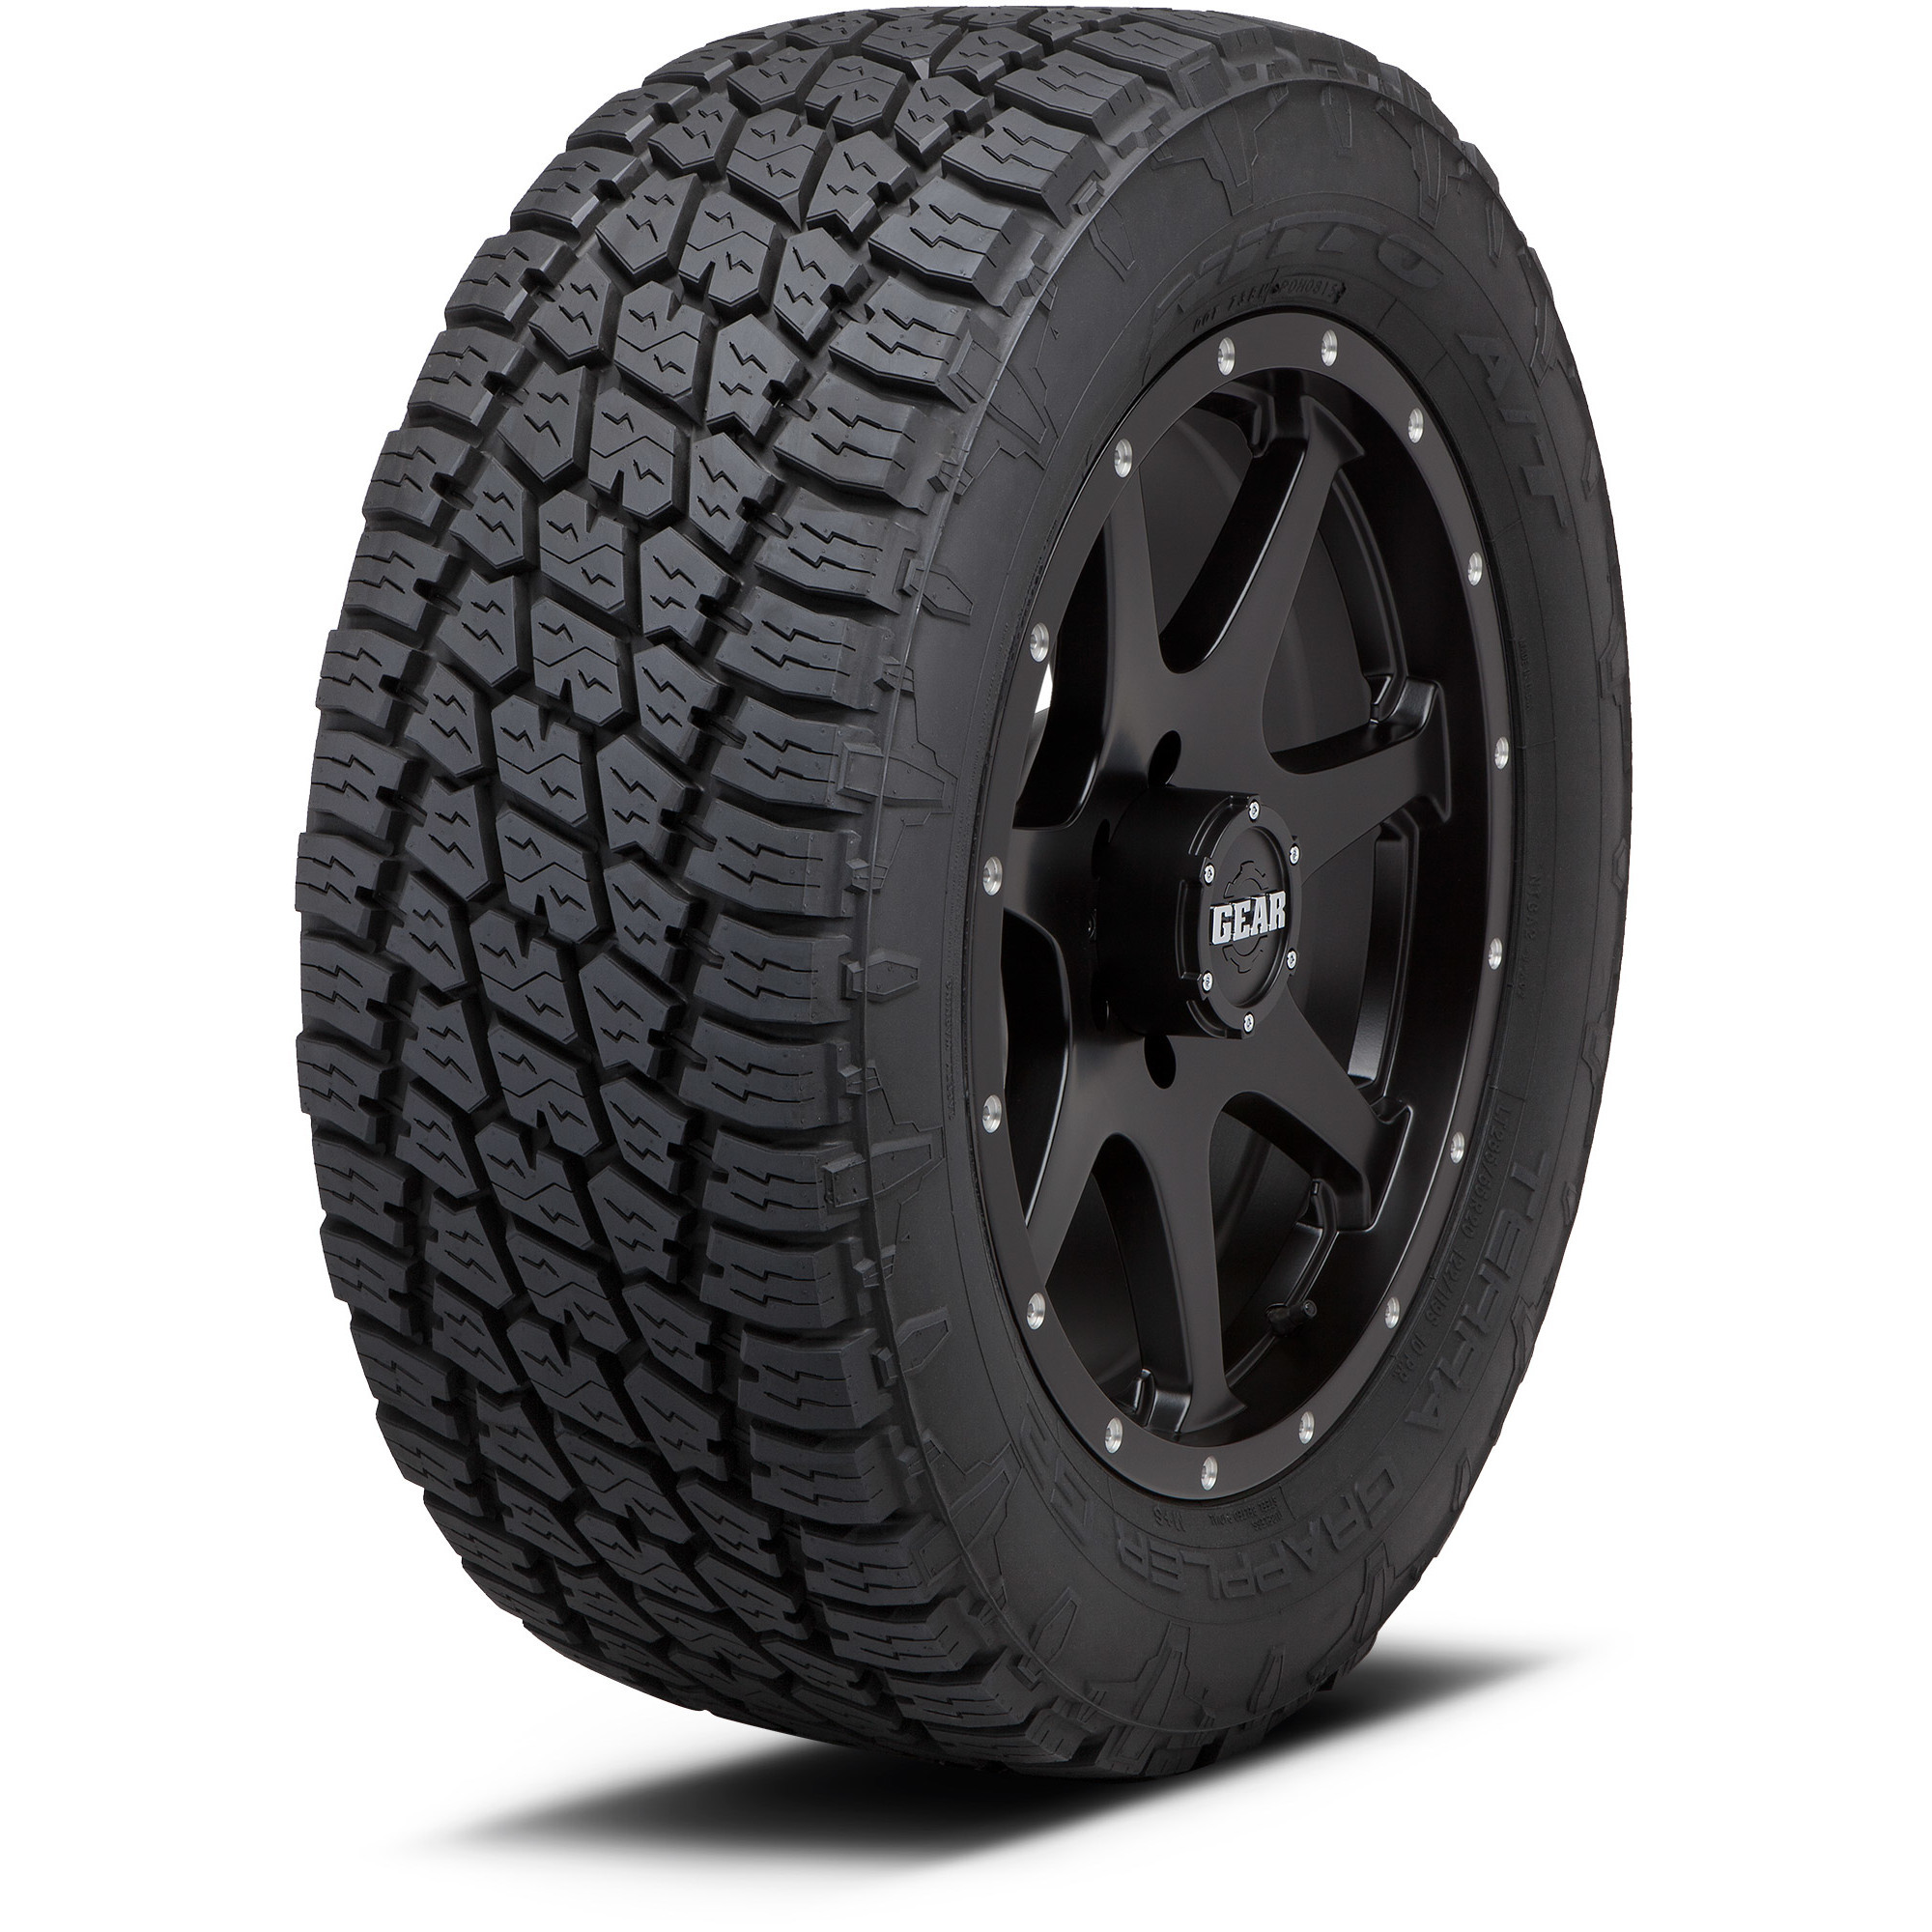 Are Nitto Terra Grappler G2 Good In Snow